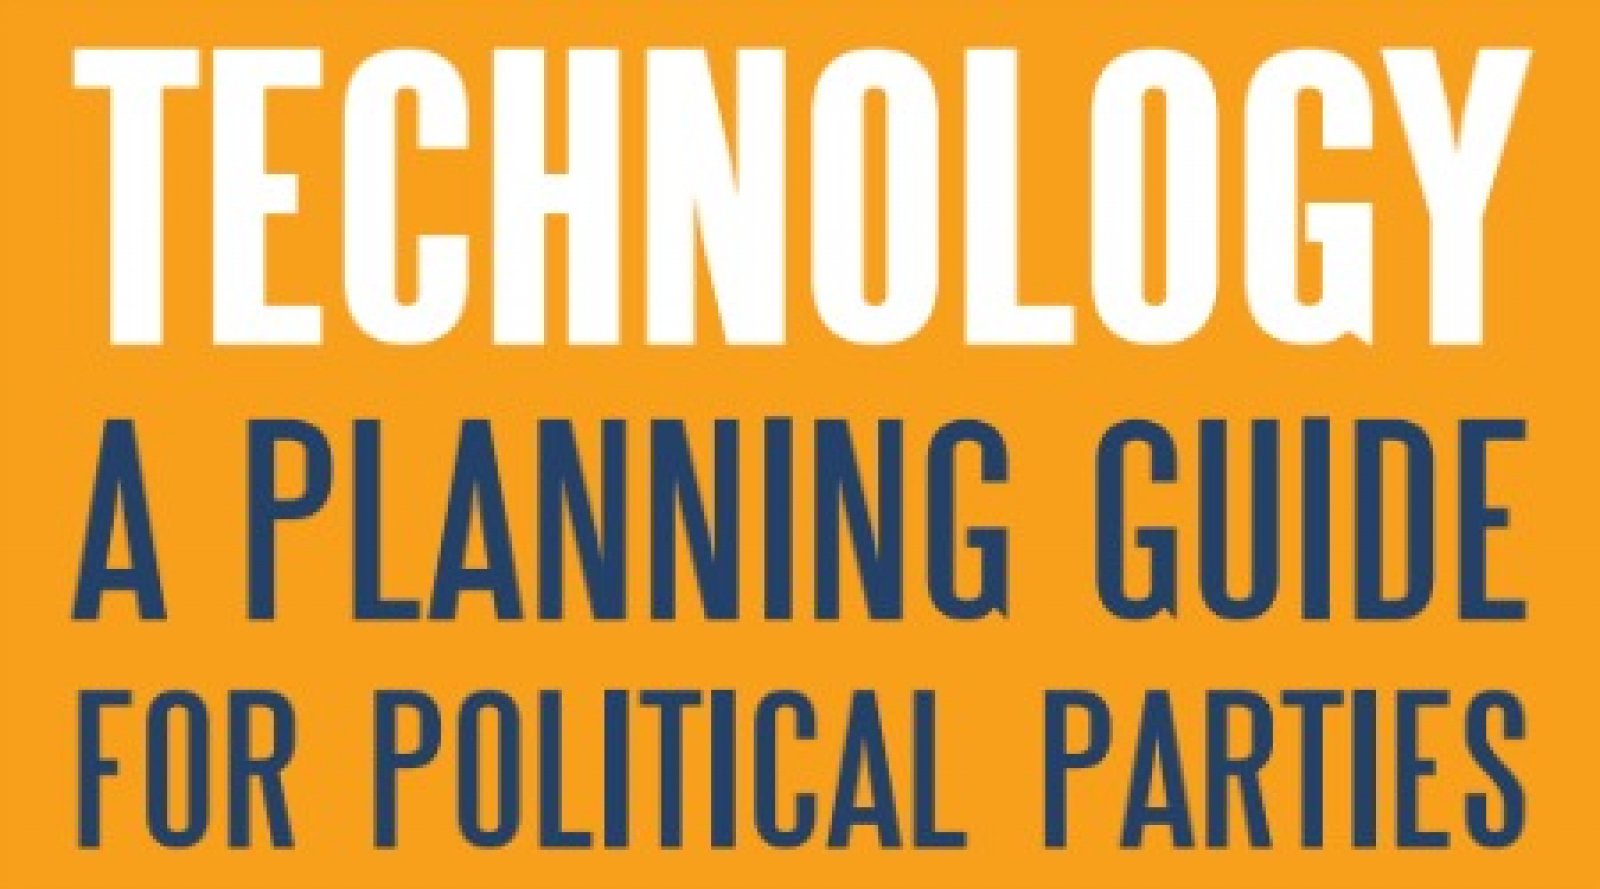 New Guide Helps Parties Understand Tech ‘Dos and Don’ts’